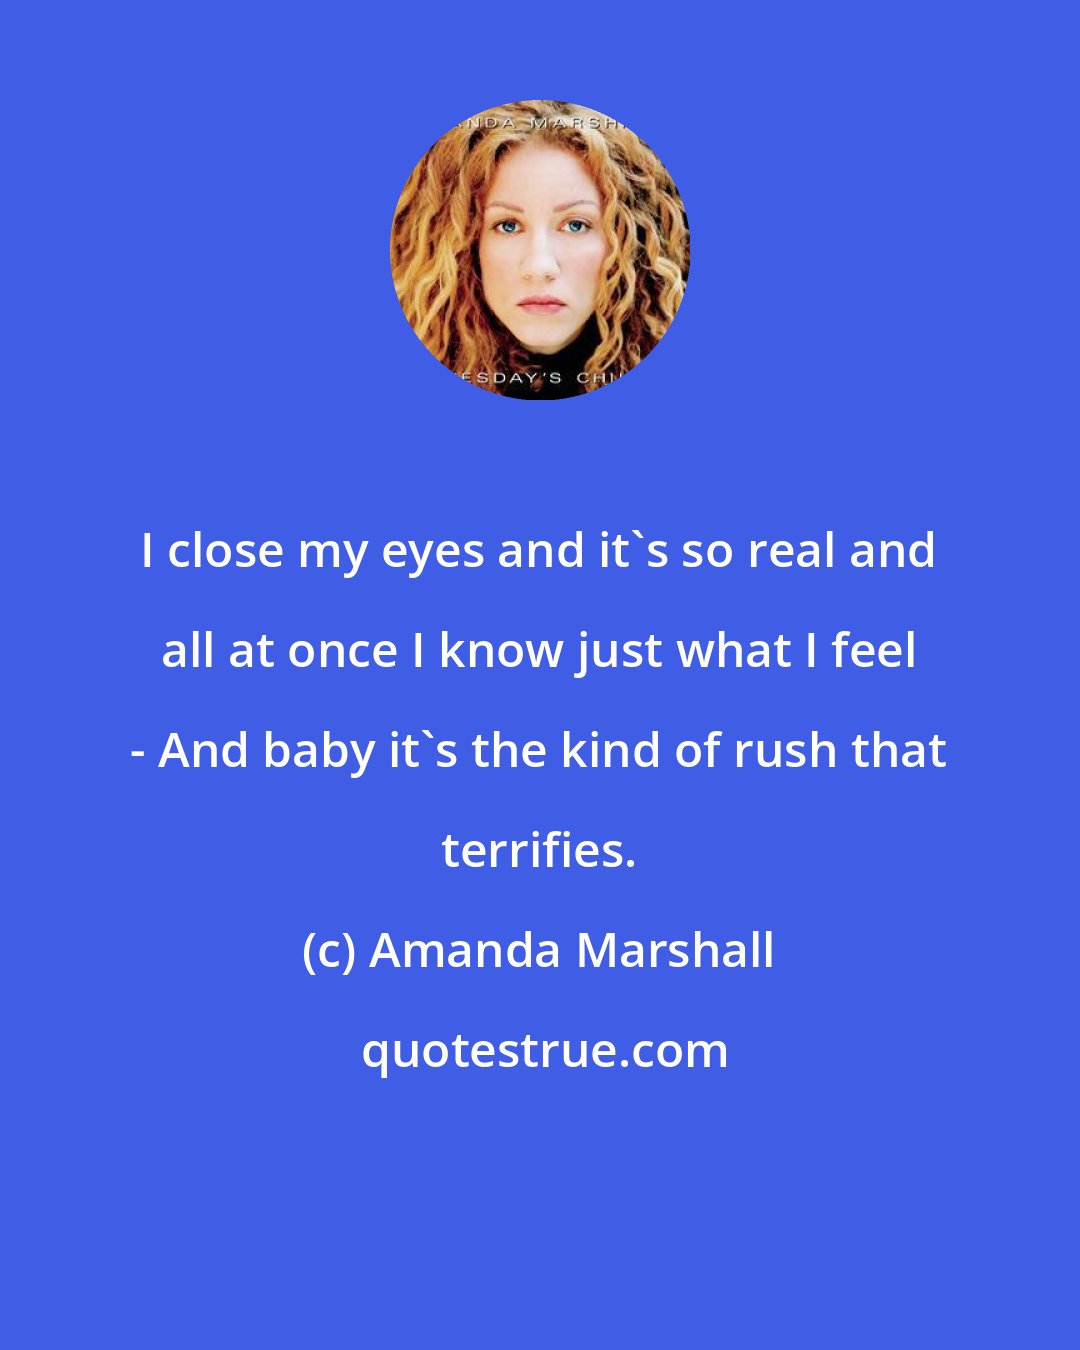 Amanda Marshall: I close my eyes and it's so real and all at once I know just what I feel - And baby it's the kind of rush that terrifies.